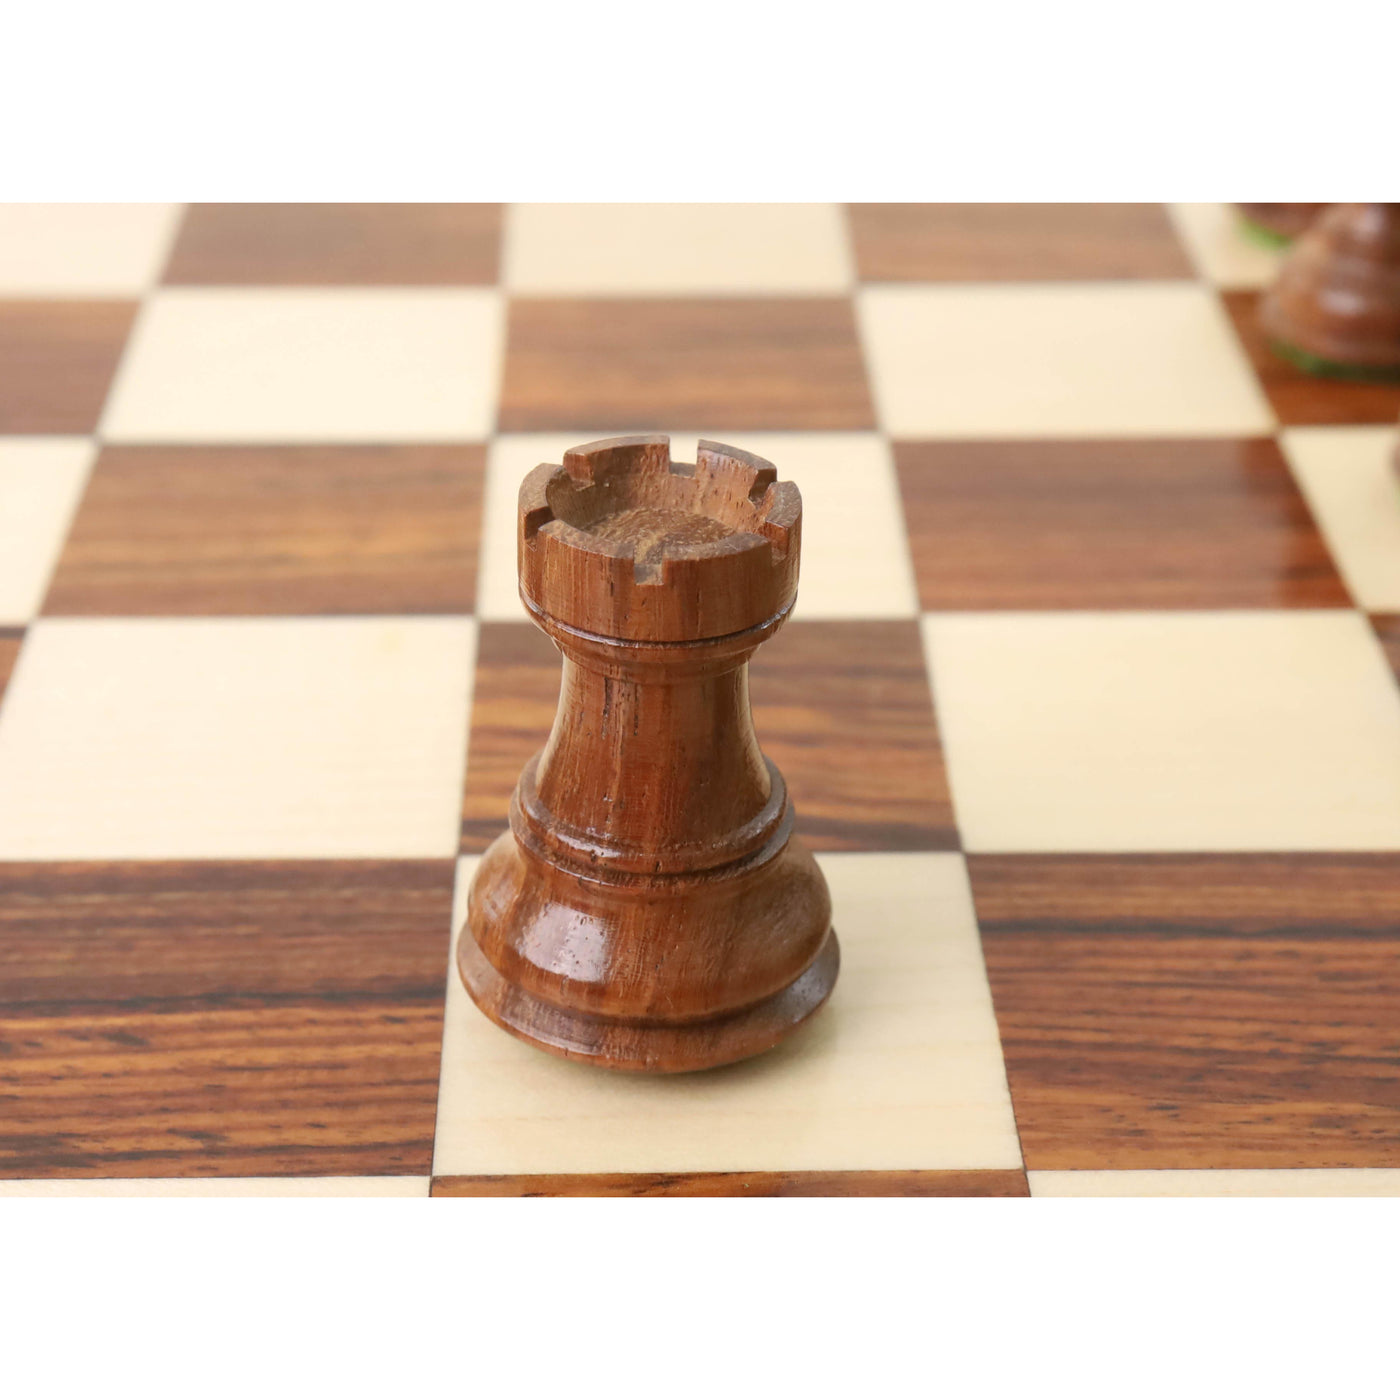 2.6" Russian Zagreb Chess set Combo -Pieces in Golden Rosewood with Board & Box